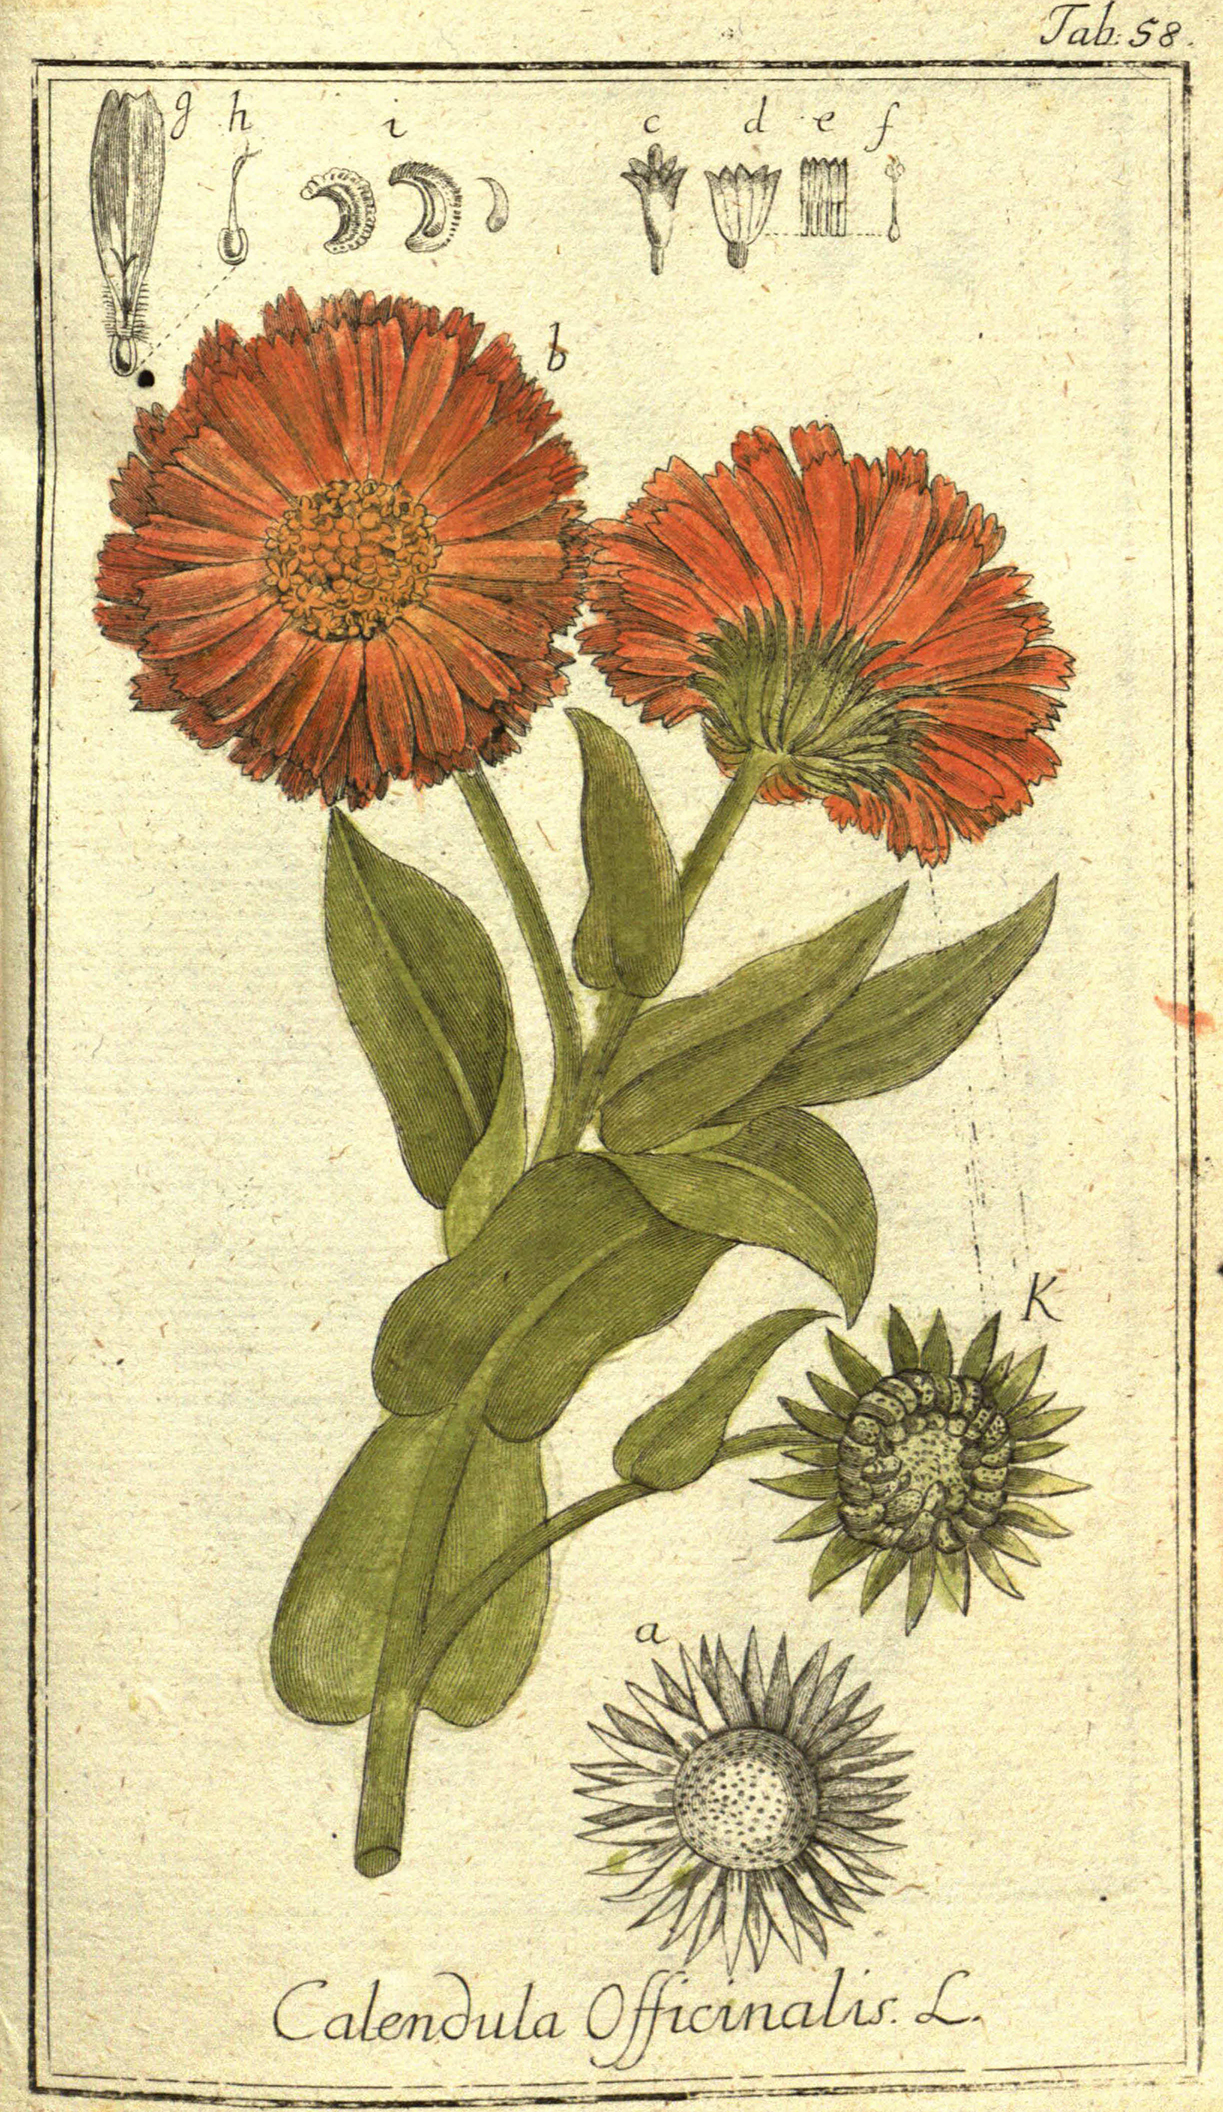 Colored illustration with large orange flower on a tall green stalk with wide green leaves.